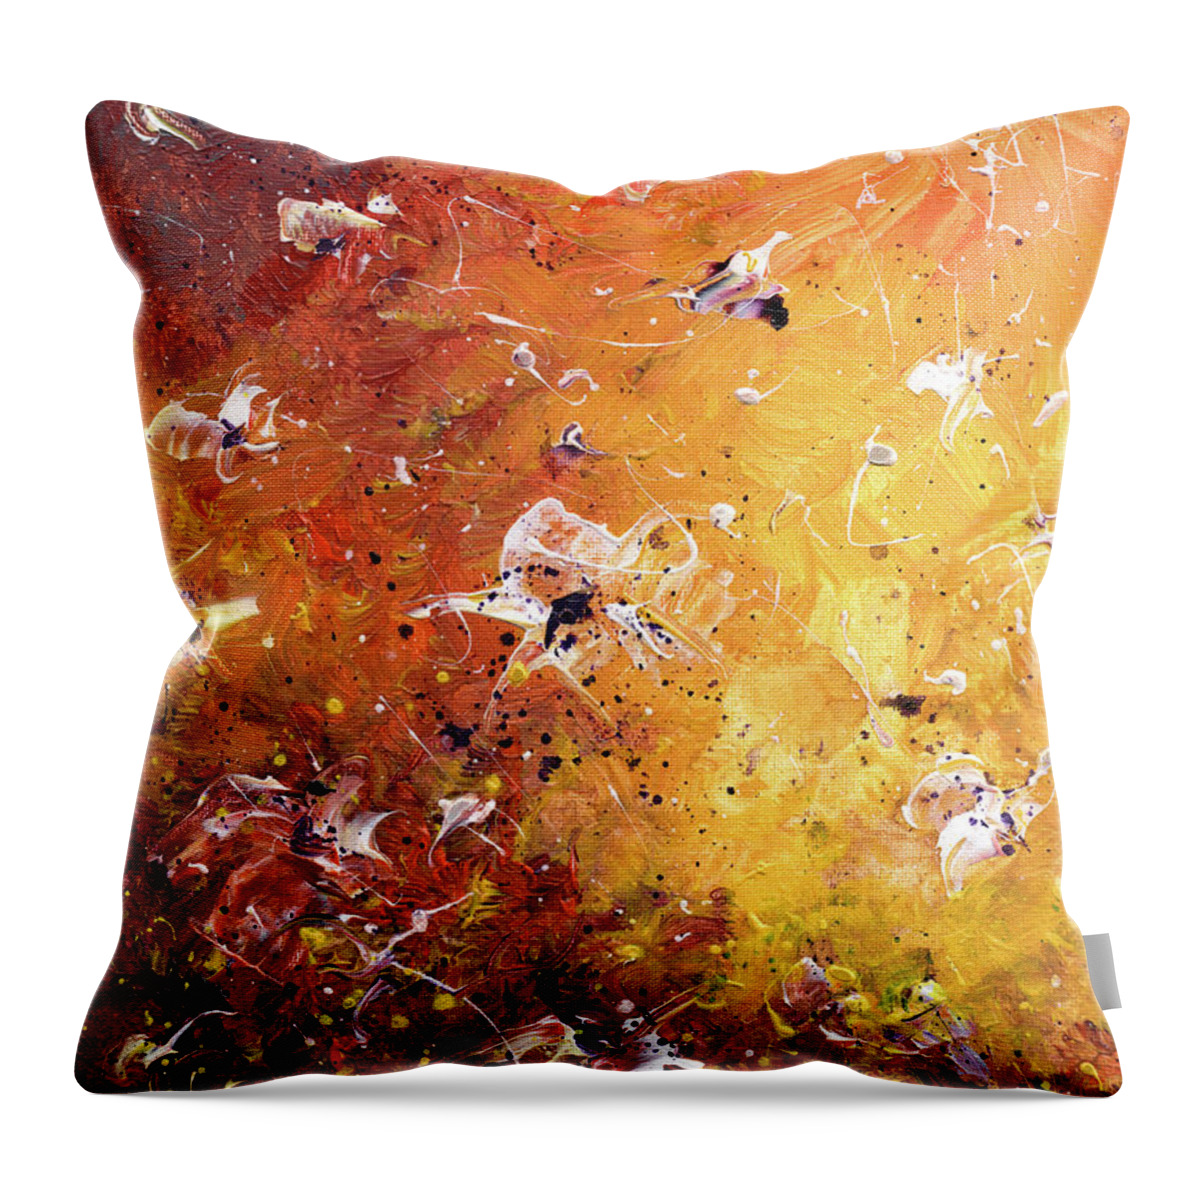 Acrylics Throw Pillow featuring the painting Fly With Me 11 by Miki De Goodaboom